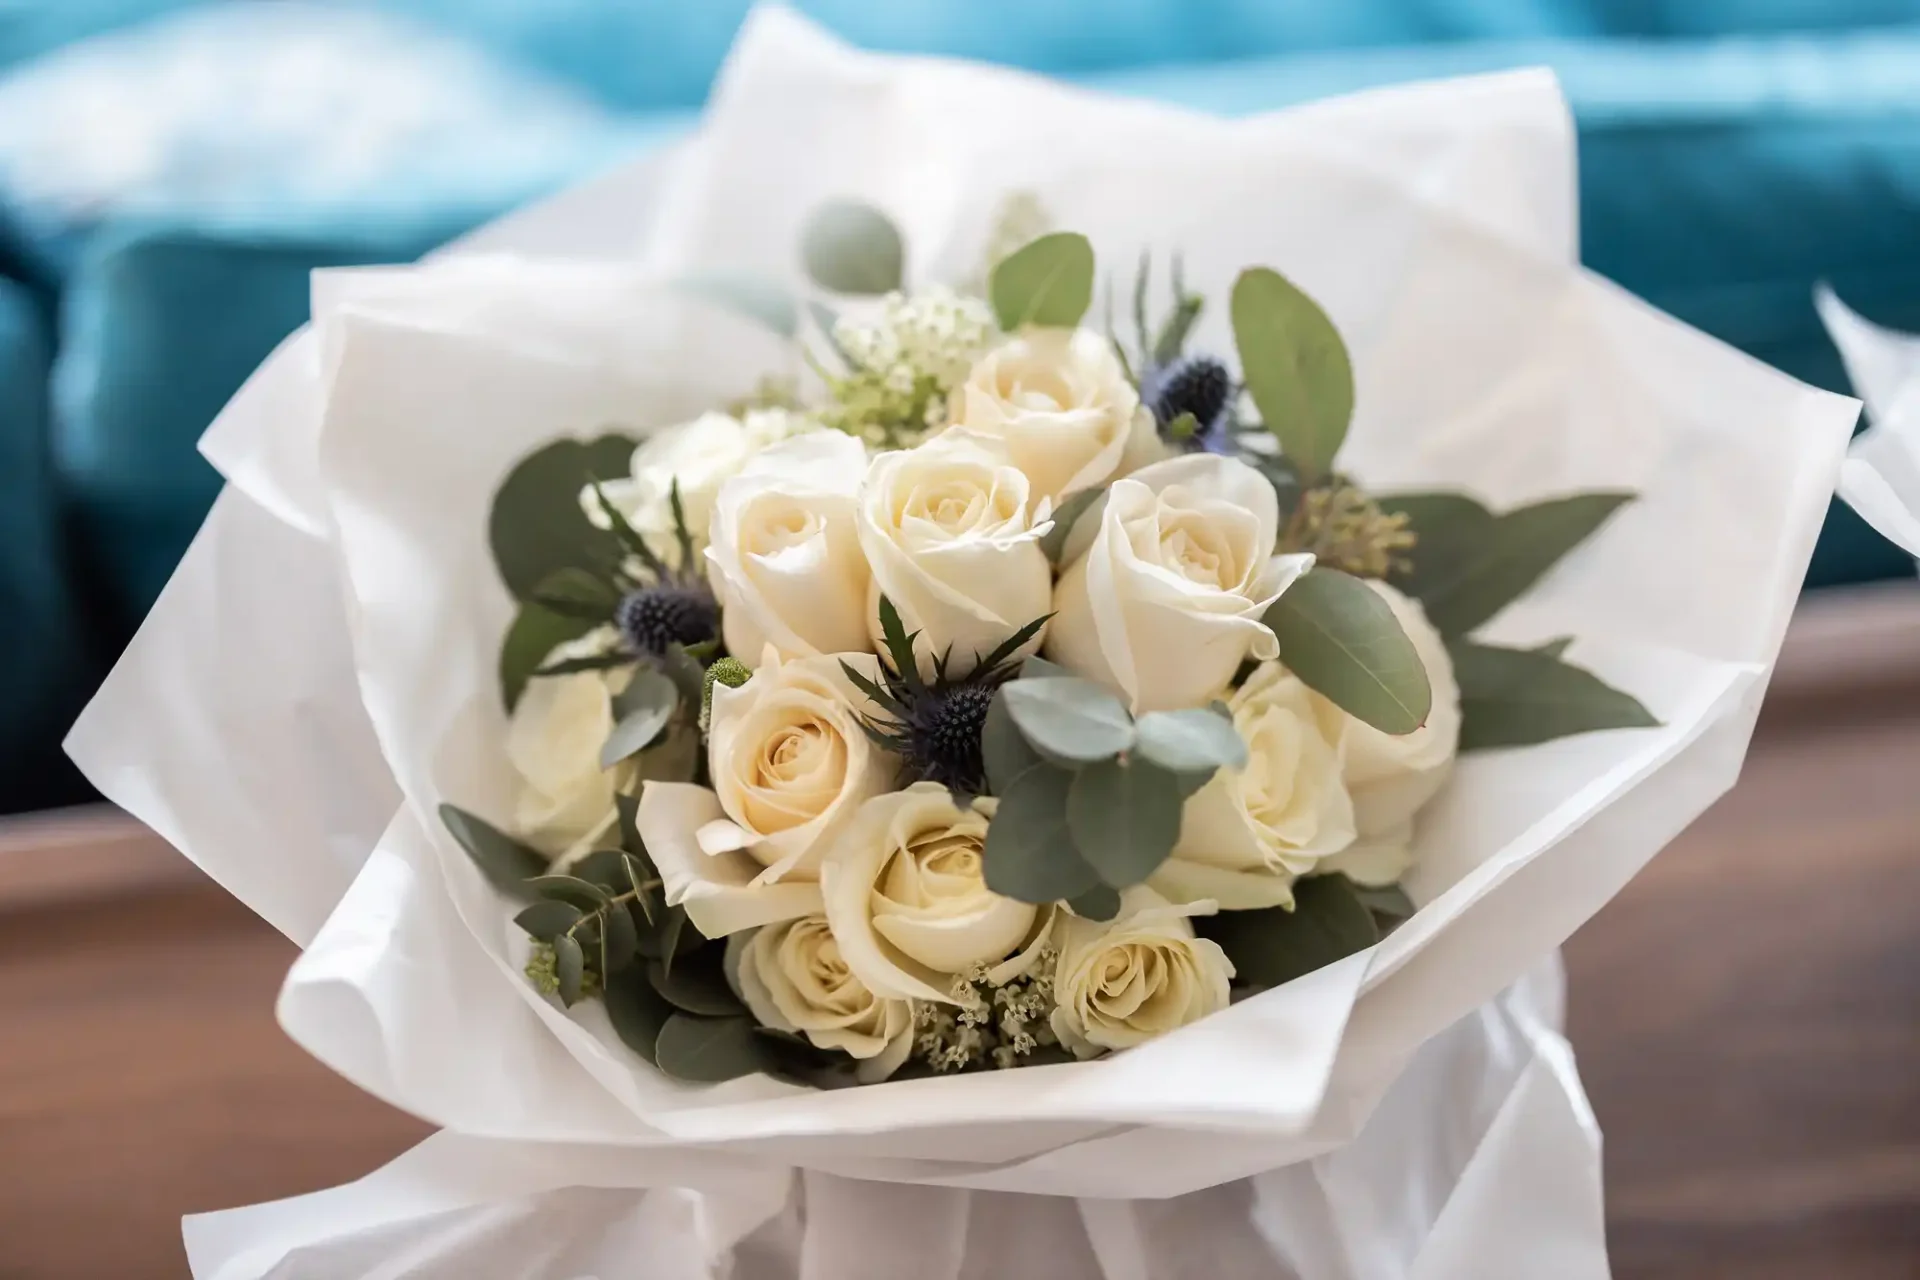 A bouquet of white roses and greenery wrapped in white paper, resting on a blue couch.